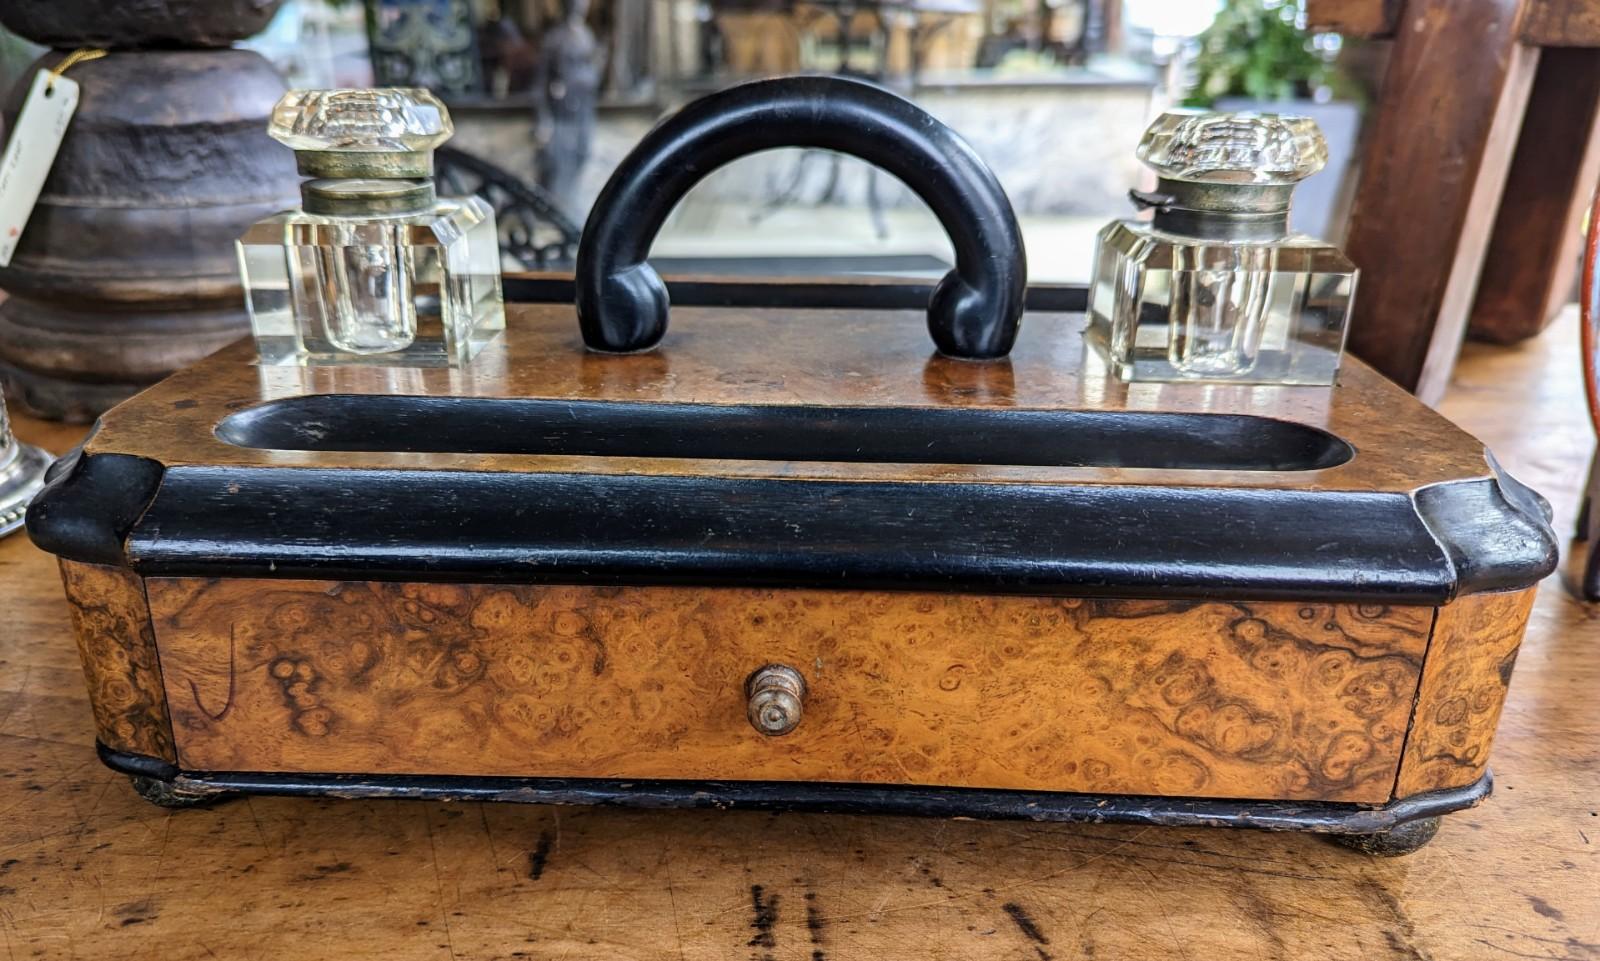 Stunning antique Victorian desk set with the original pair of glass inkwells, sitting on a lovey quality figured burled wood writing box with a molded edge. Features two cut crystal inkwells and a drawer along with a handle for carrying.